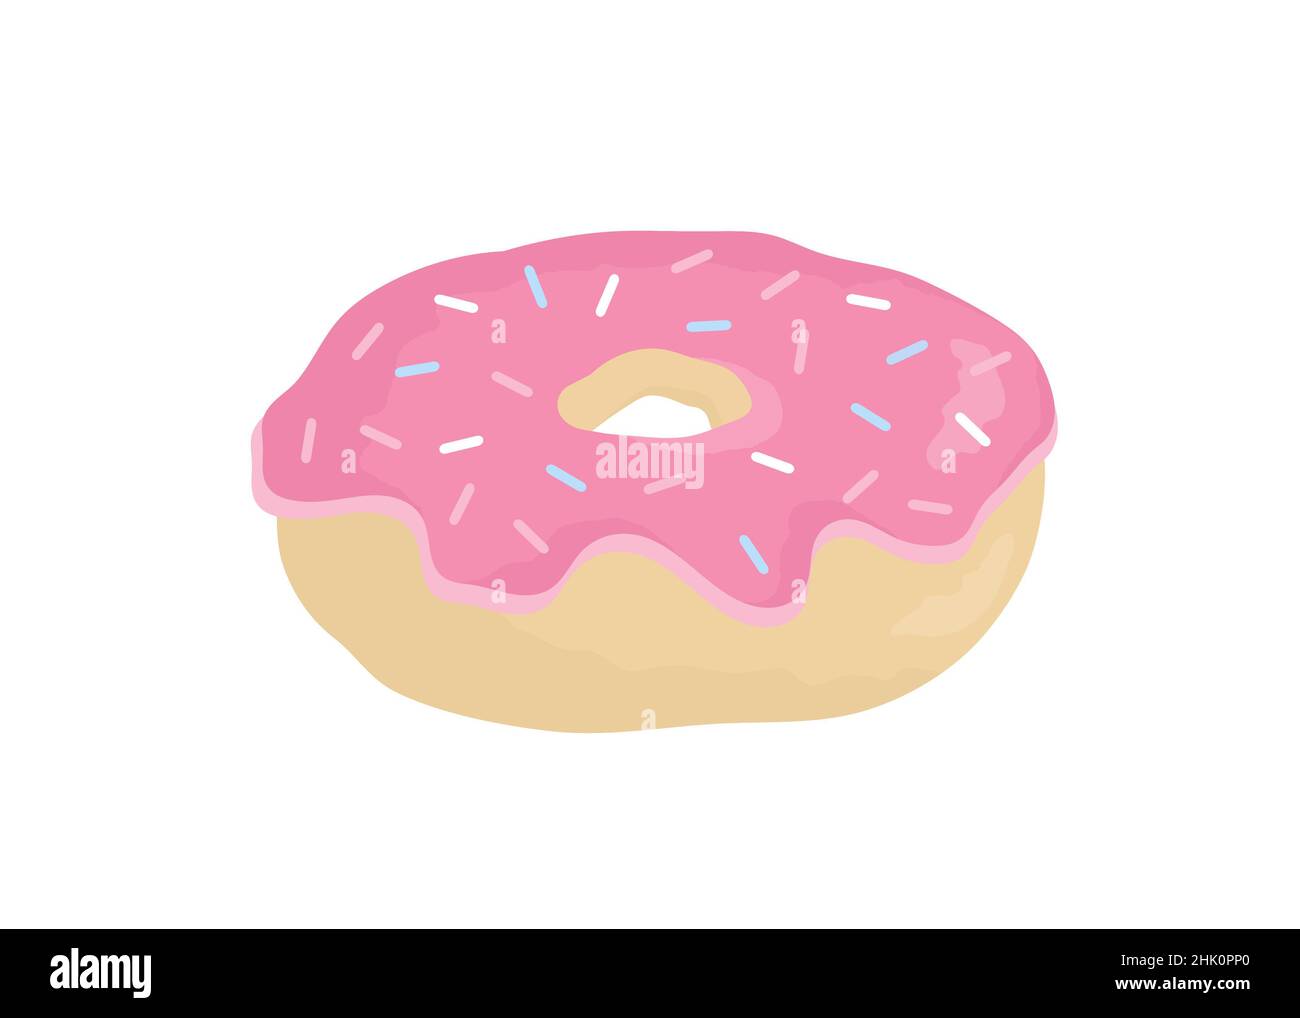 digital illustration of a pink donut  isolated on white background Stock Photo